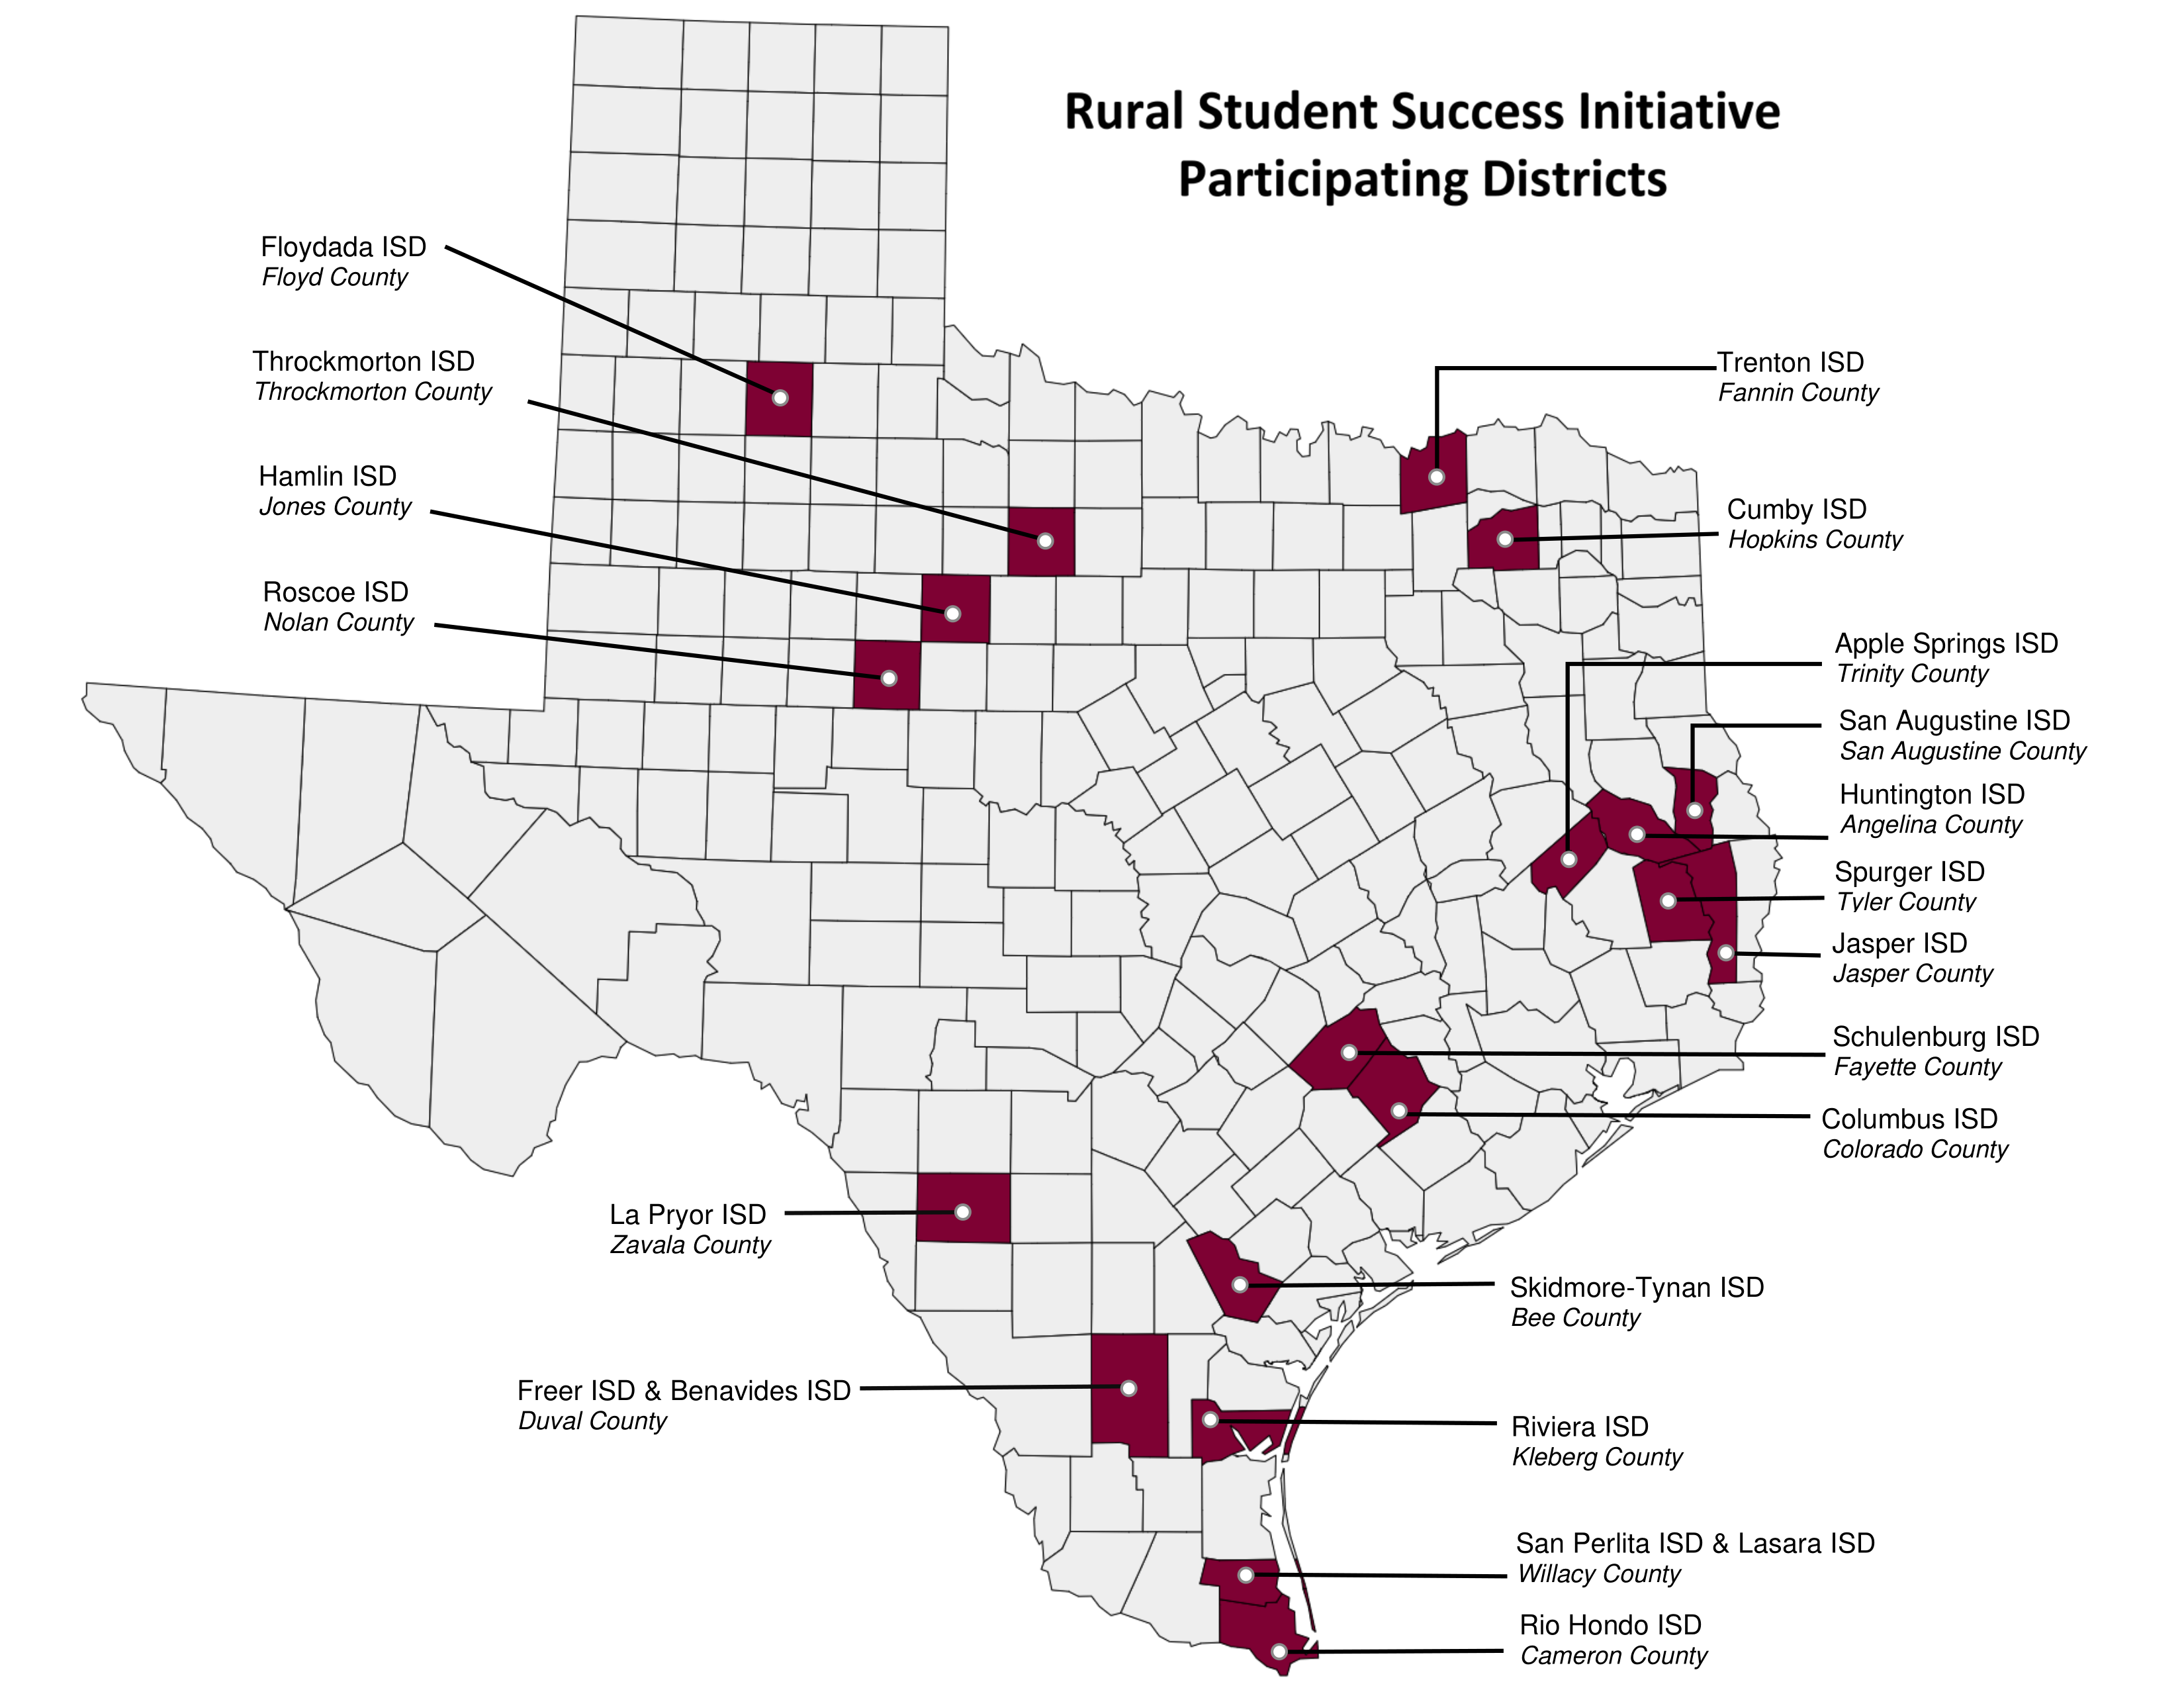 Rural Student Success Initiative Participating Districts